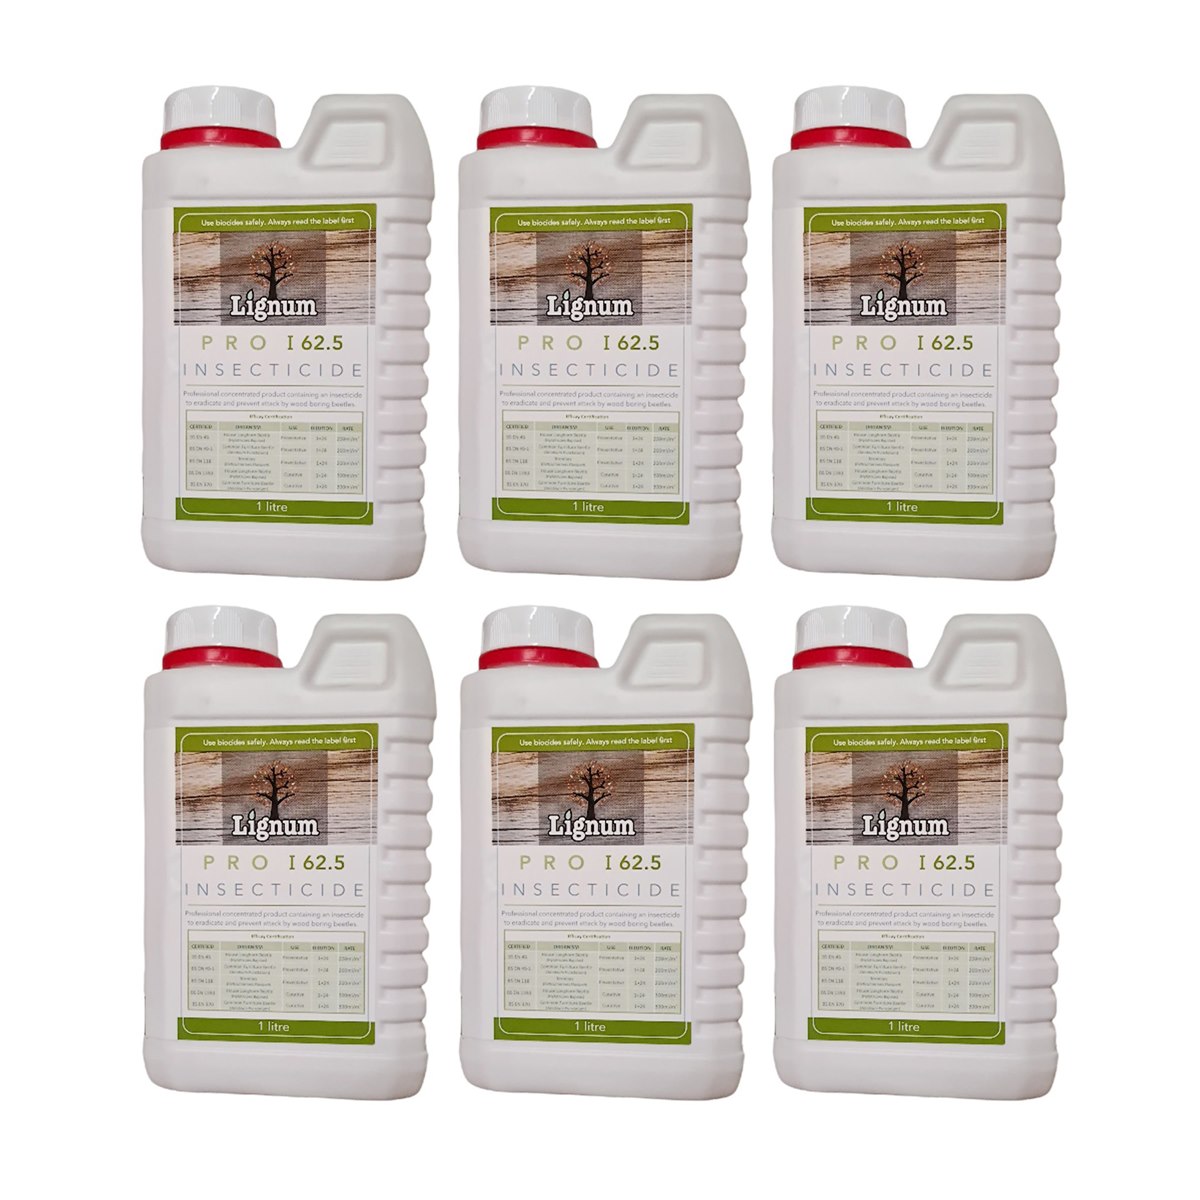 Case of 6 x Lignum Pro I62.5 Professional Concentrated Insecticide 1 Litre